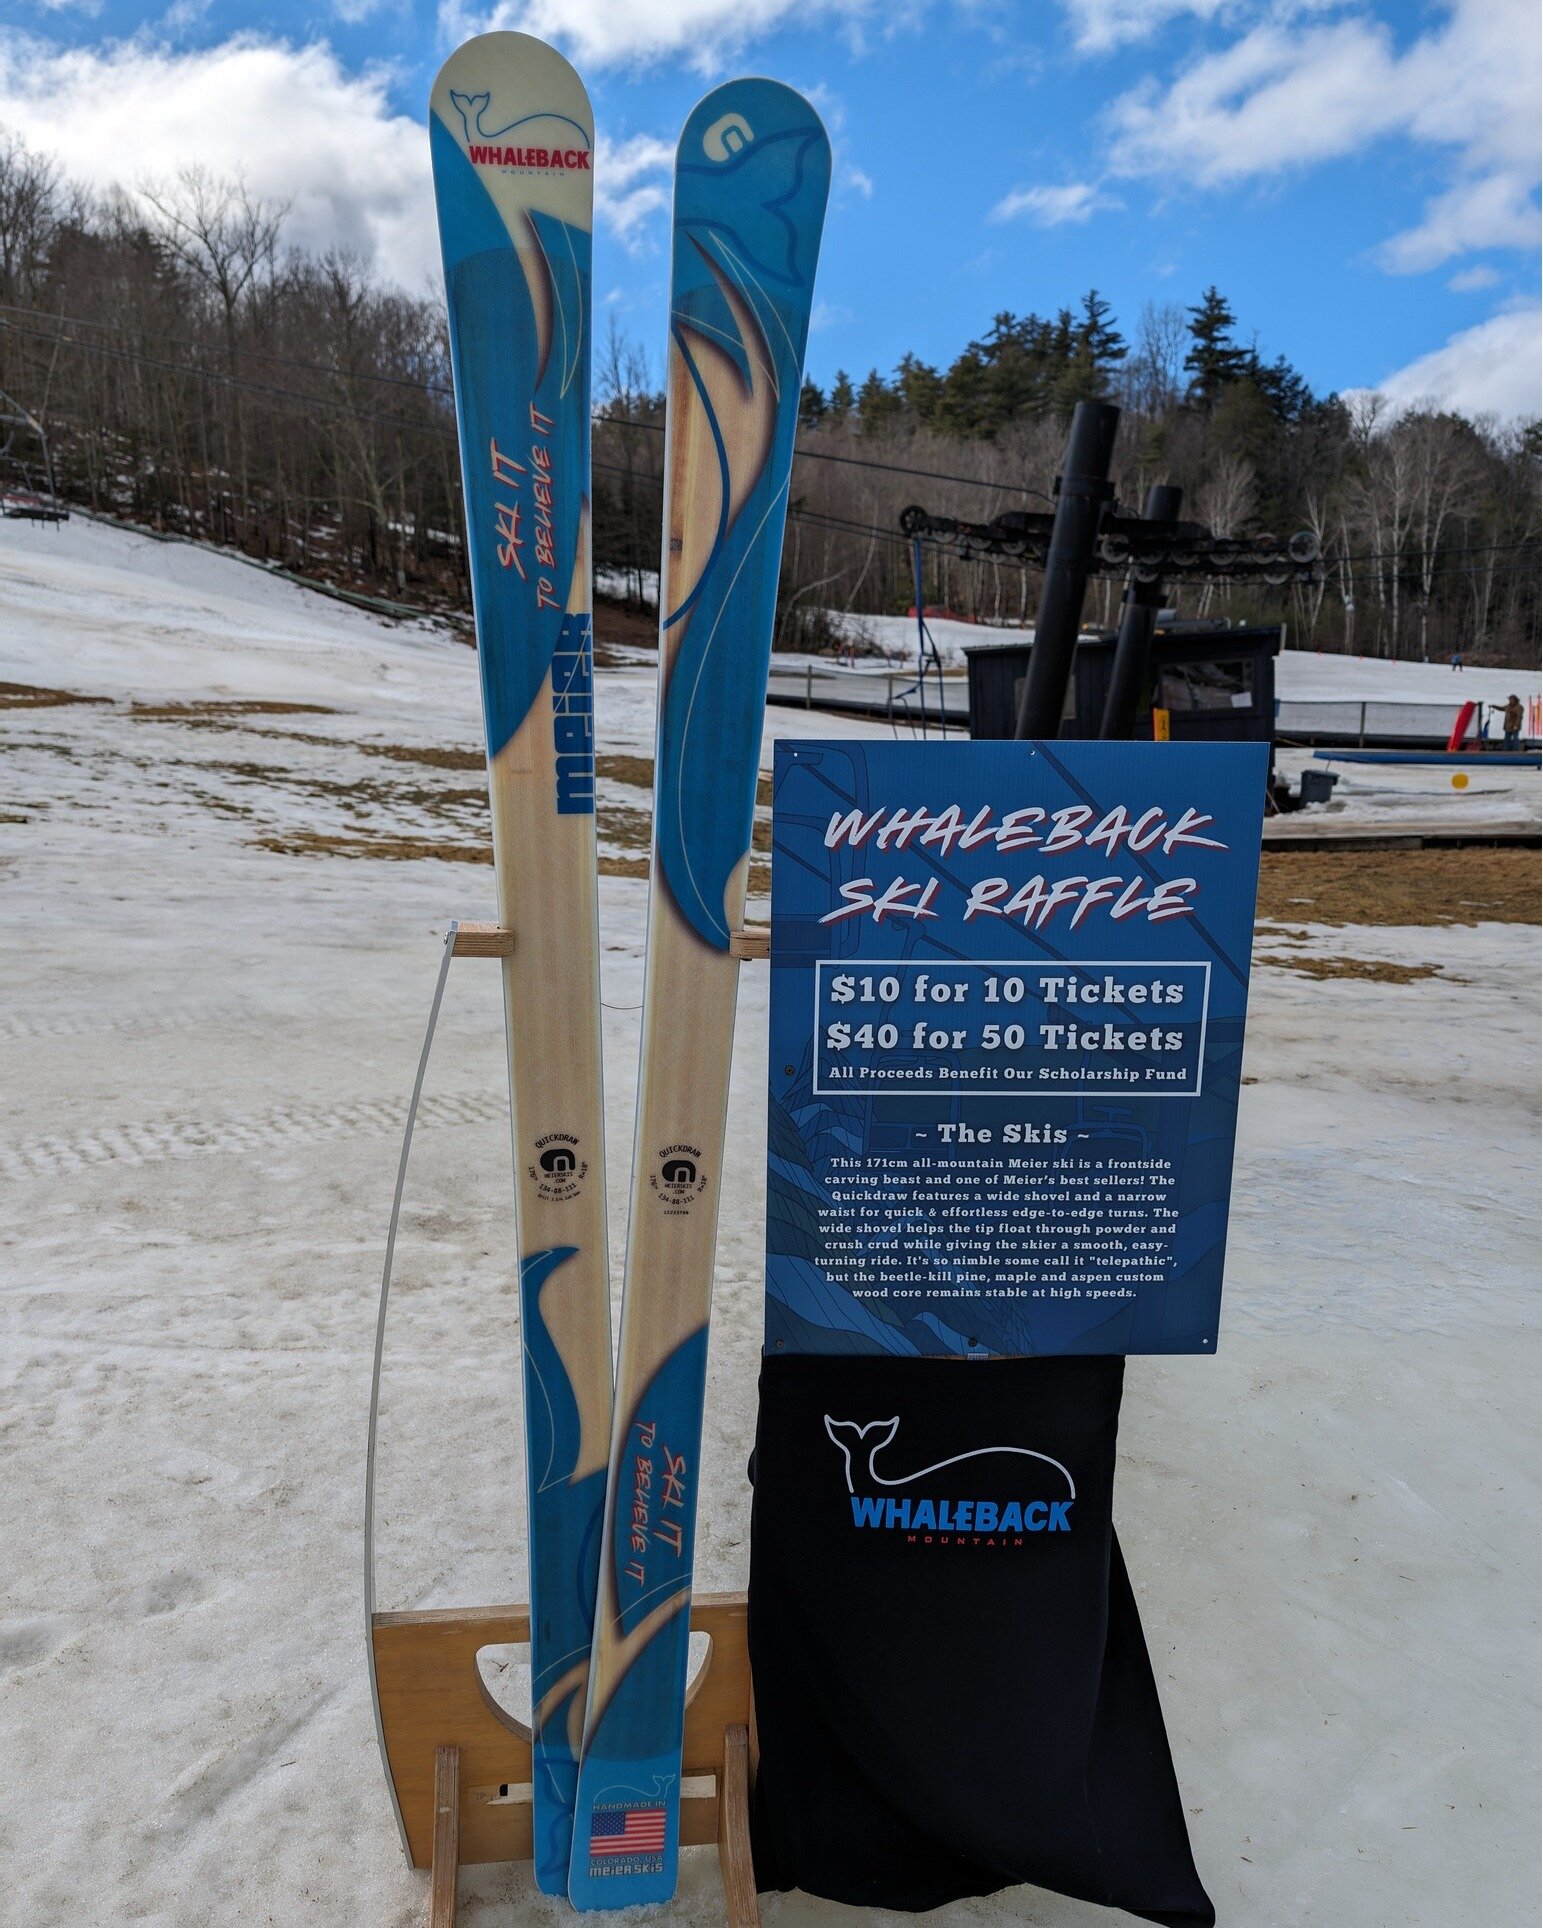 Last Chance Alert! This is your FINAL call to win a pair of Whaleback Custom @meierskis ! Hit the link in our bio to grab your raffle tickets! Imagine cruising down the mountains on these beautiful 176cm skis crafted just for you. Don't let this oppo